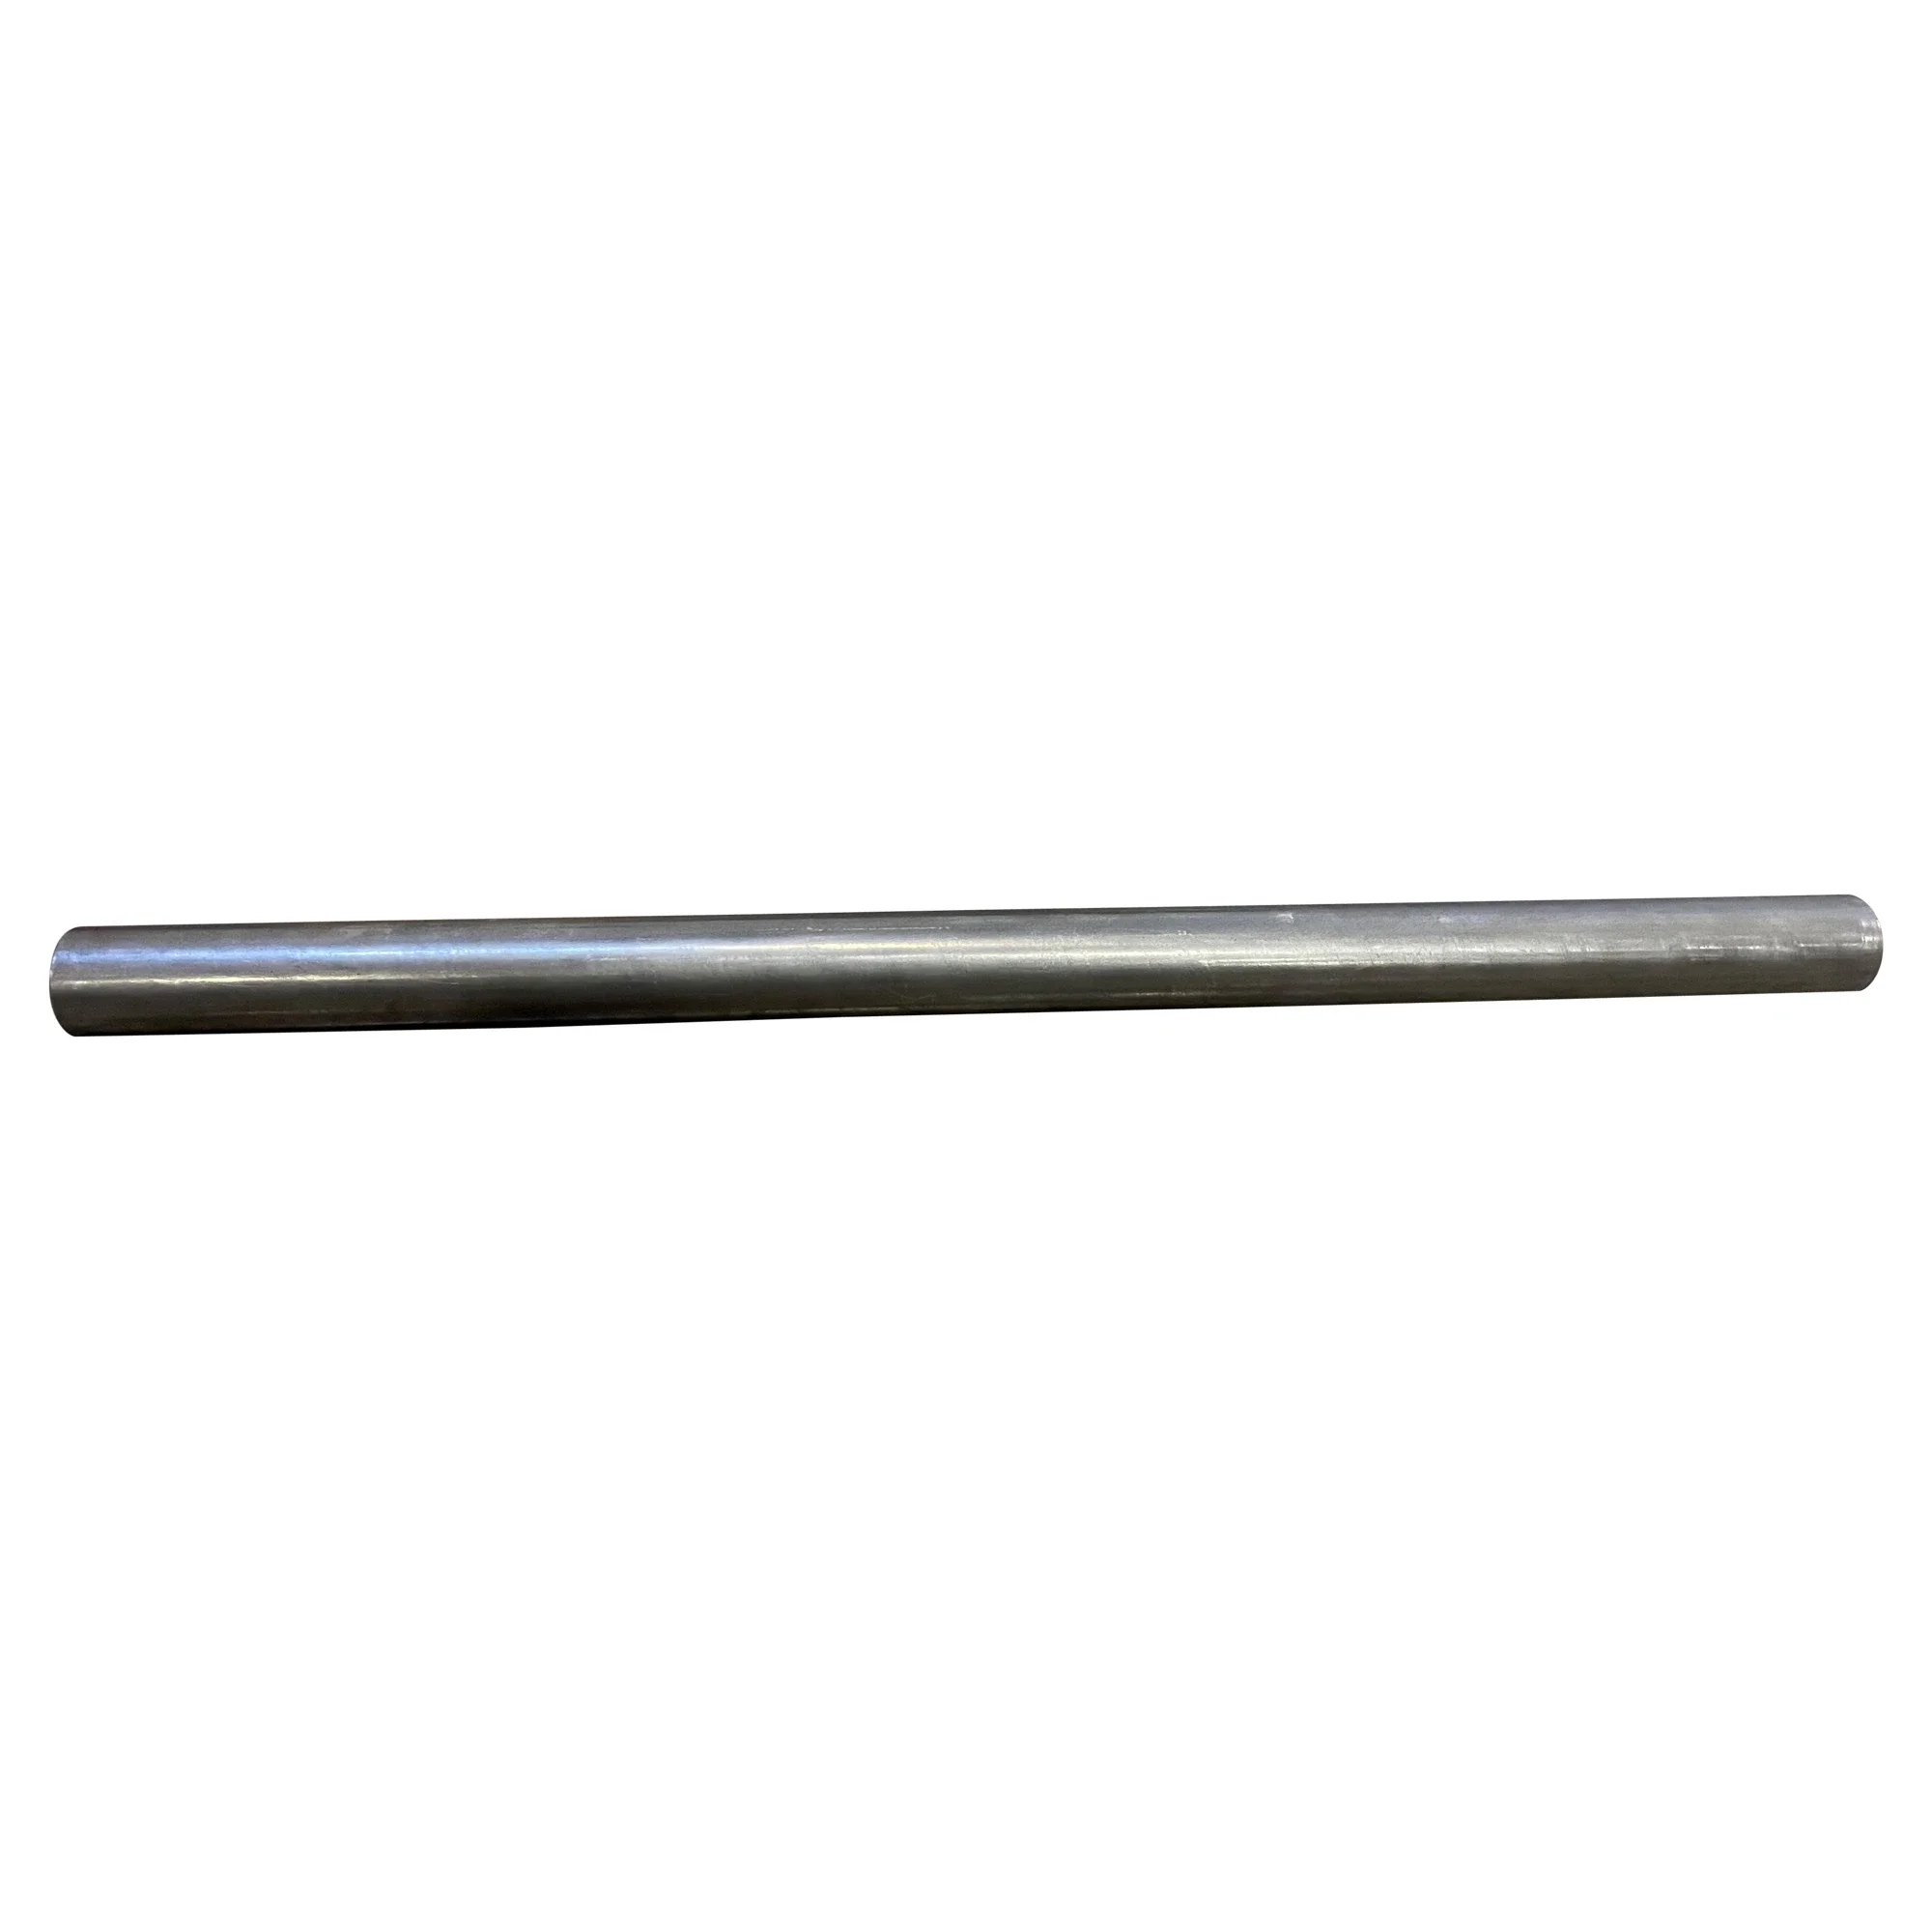 Wastebuilt® Replacement for Heil 36" x 2" Tail Roller Shaft